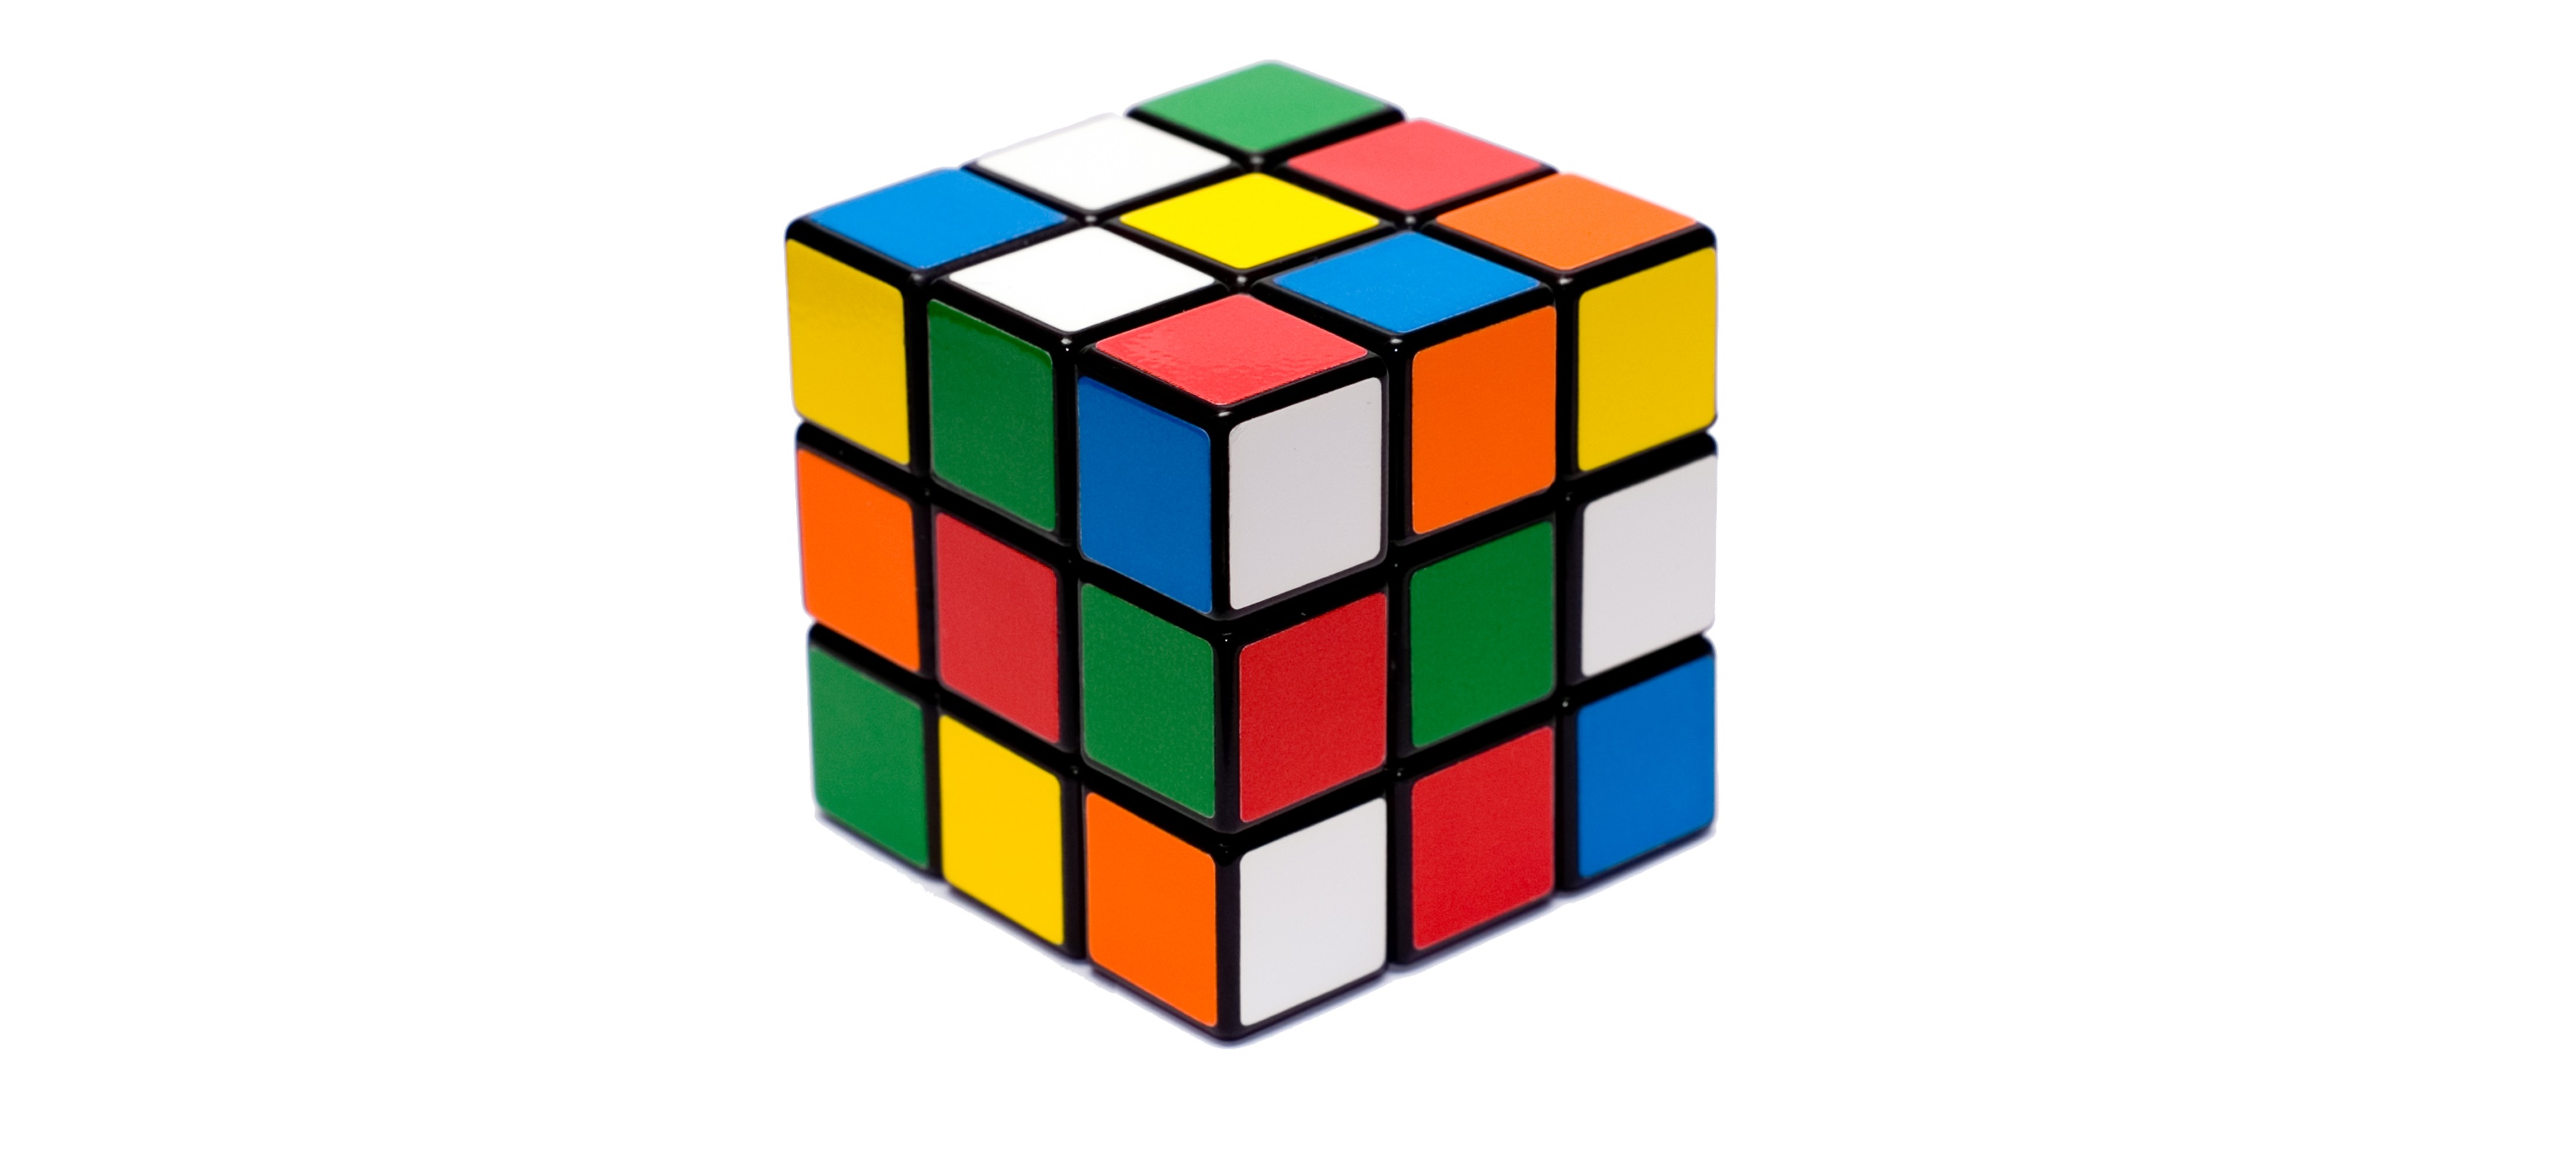 the-rubik-s-cube-solves-any-paradox-steve-patterson